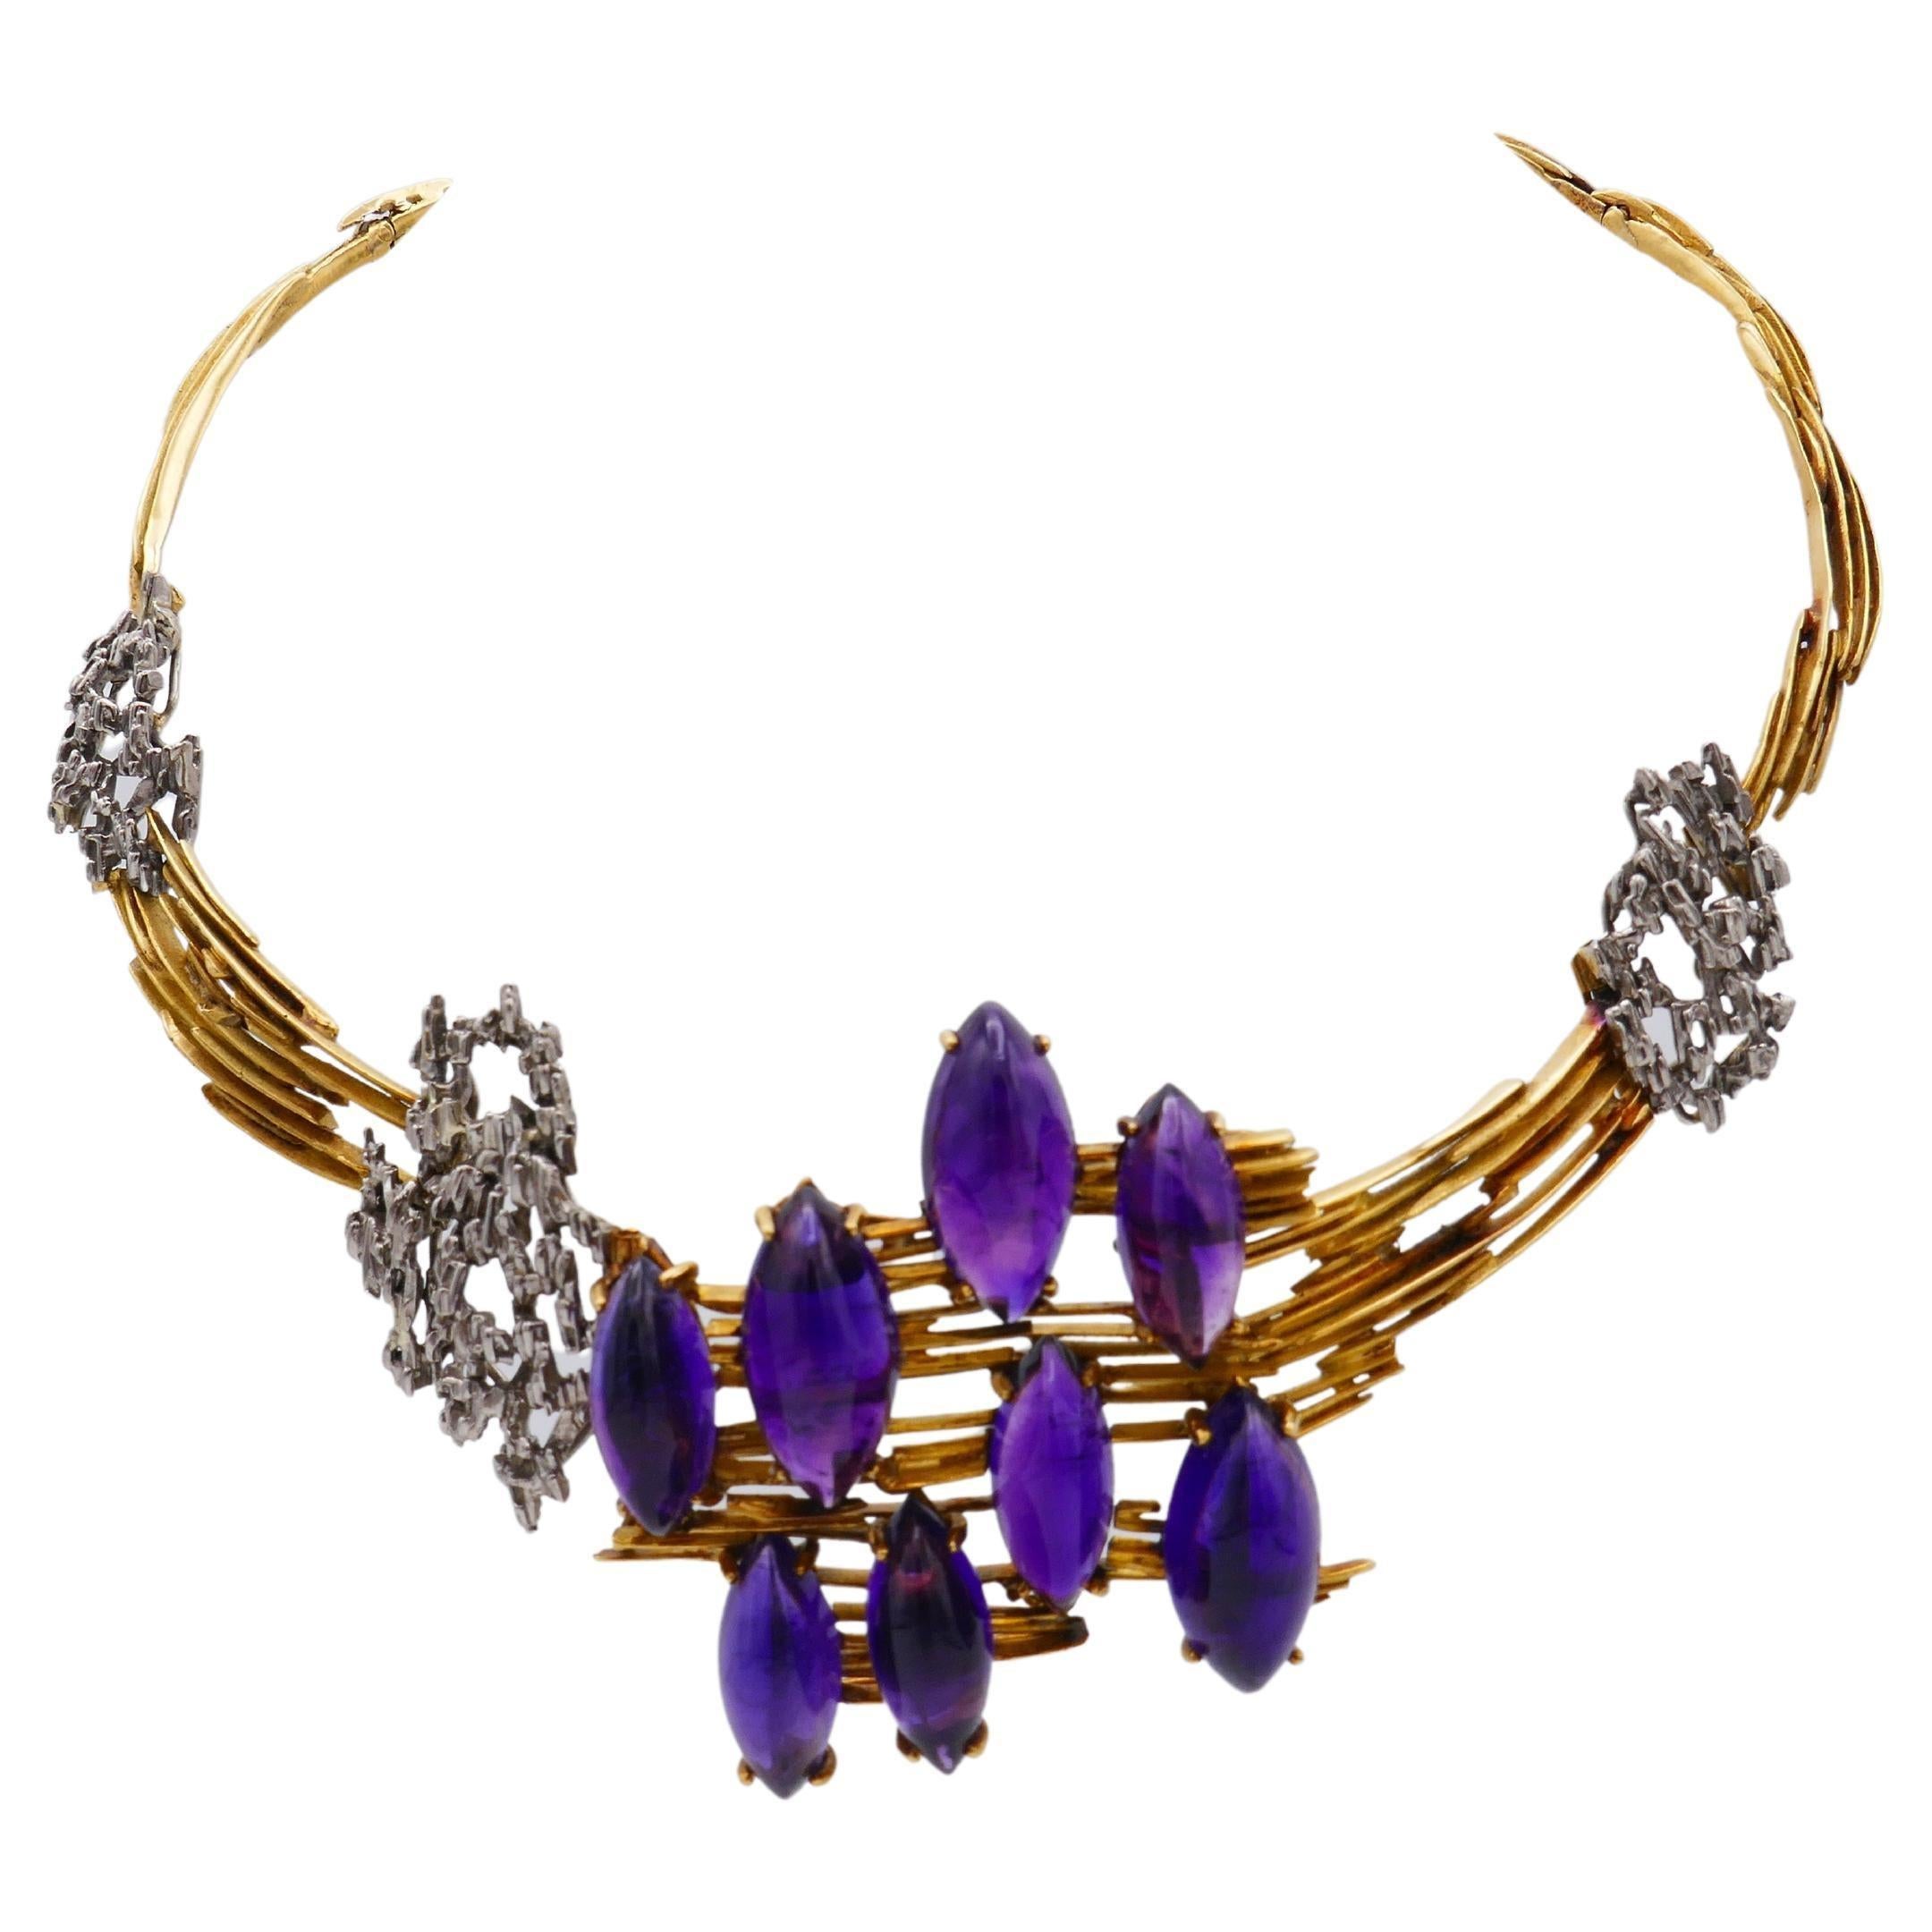 A rare creation by Mellerio, an openwork two-tone gold necklace features eight cabochon amethysts. Comprised of the moving parts connected by hinges for flexibility. Its distinctive architectural look makes a great conversation piece. 
Measurements: